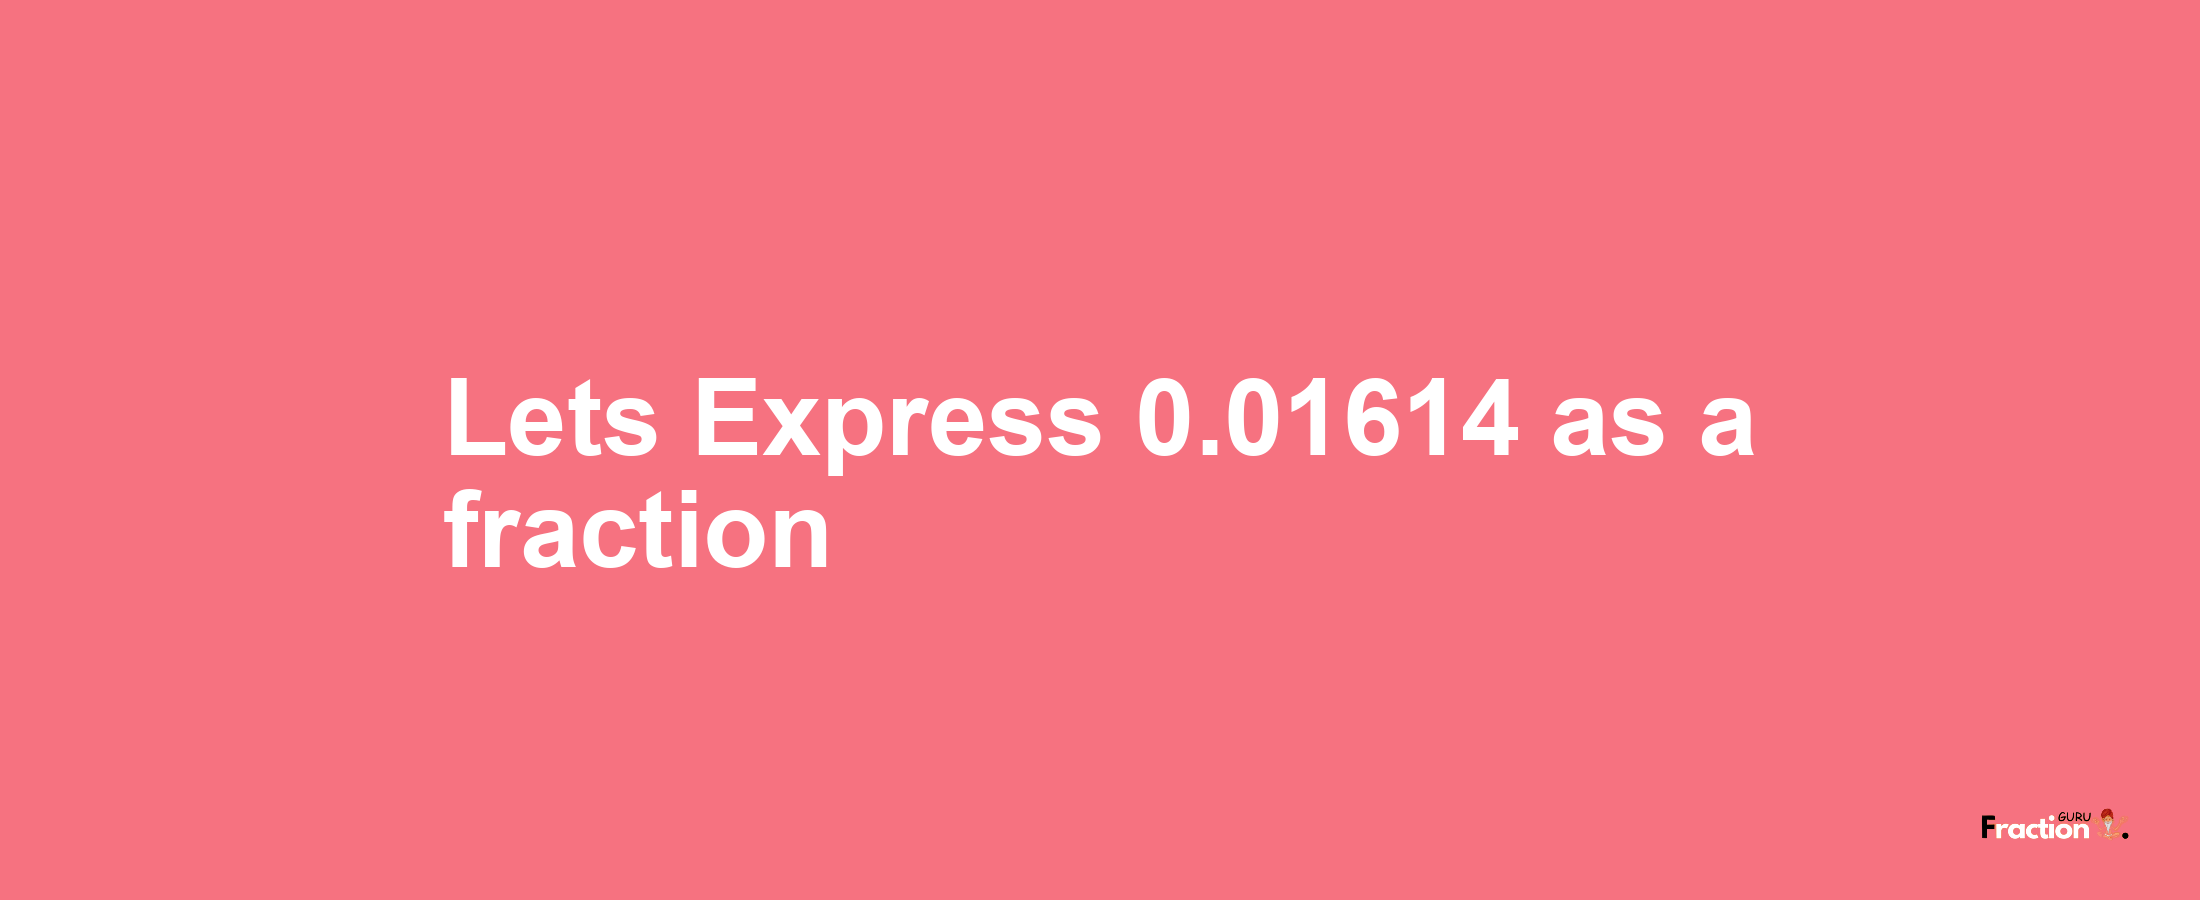 Lets Express 0.01614 as afraction